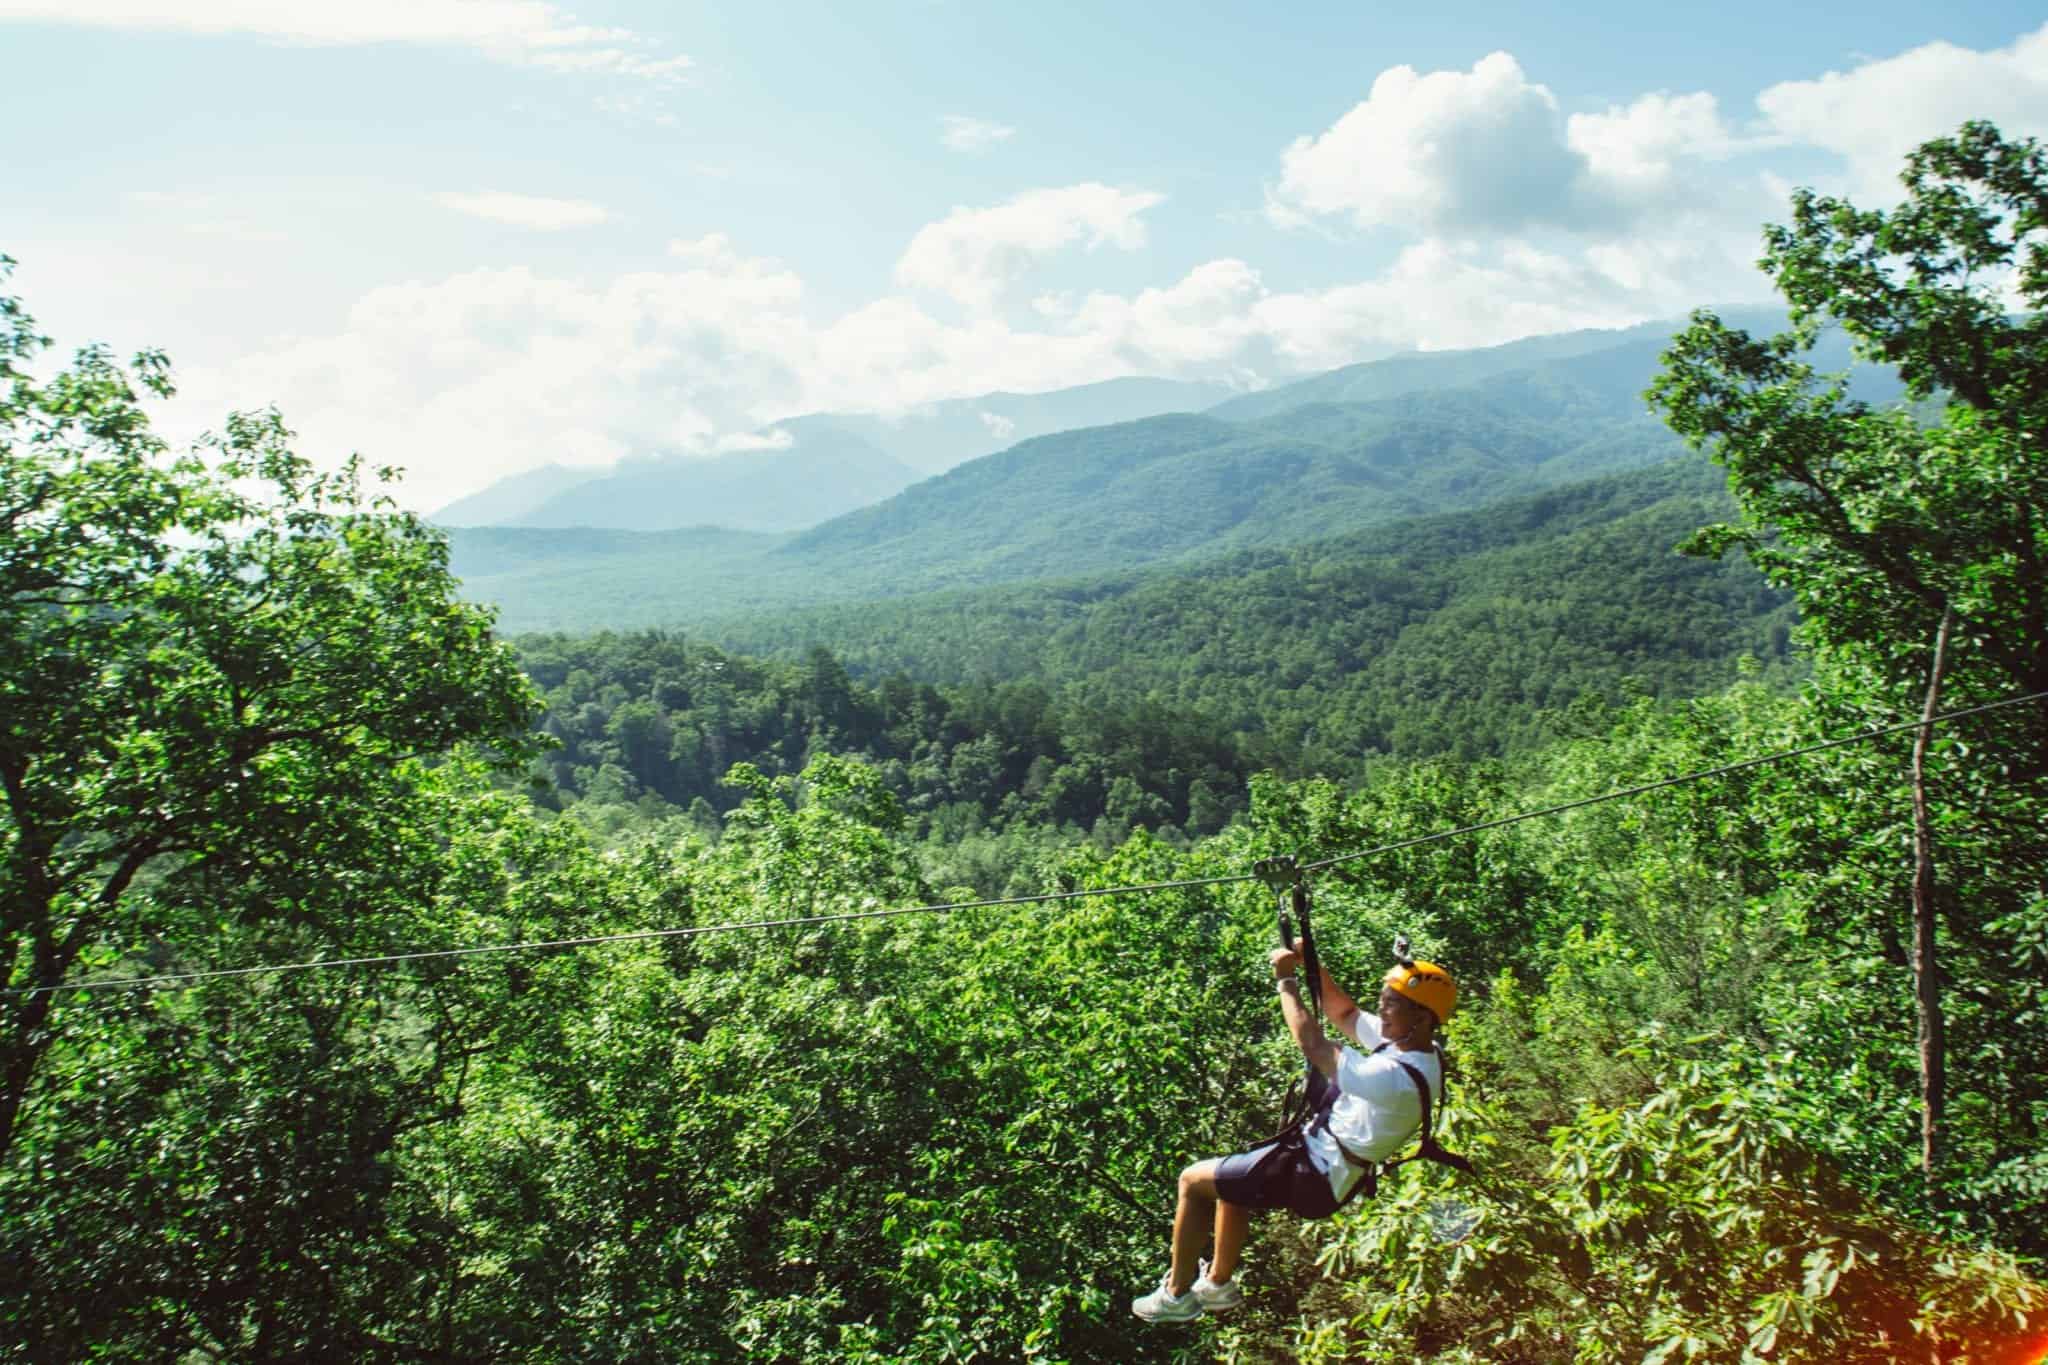 Zipline in the Smoky Mountains with climb works